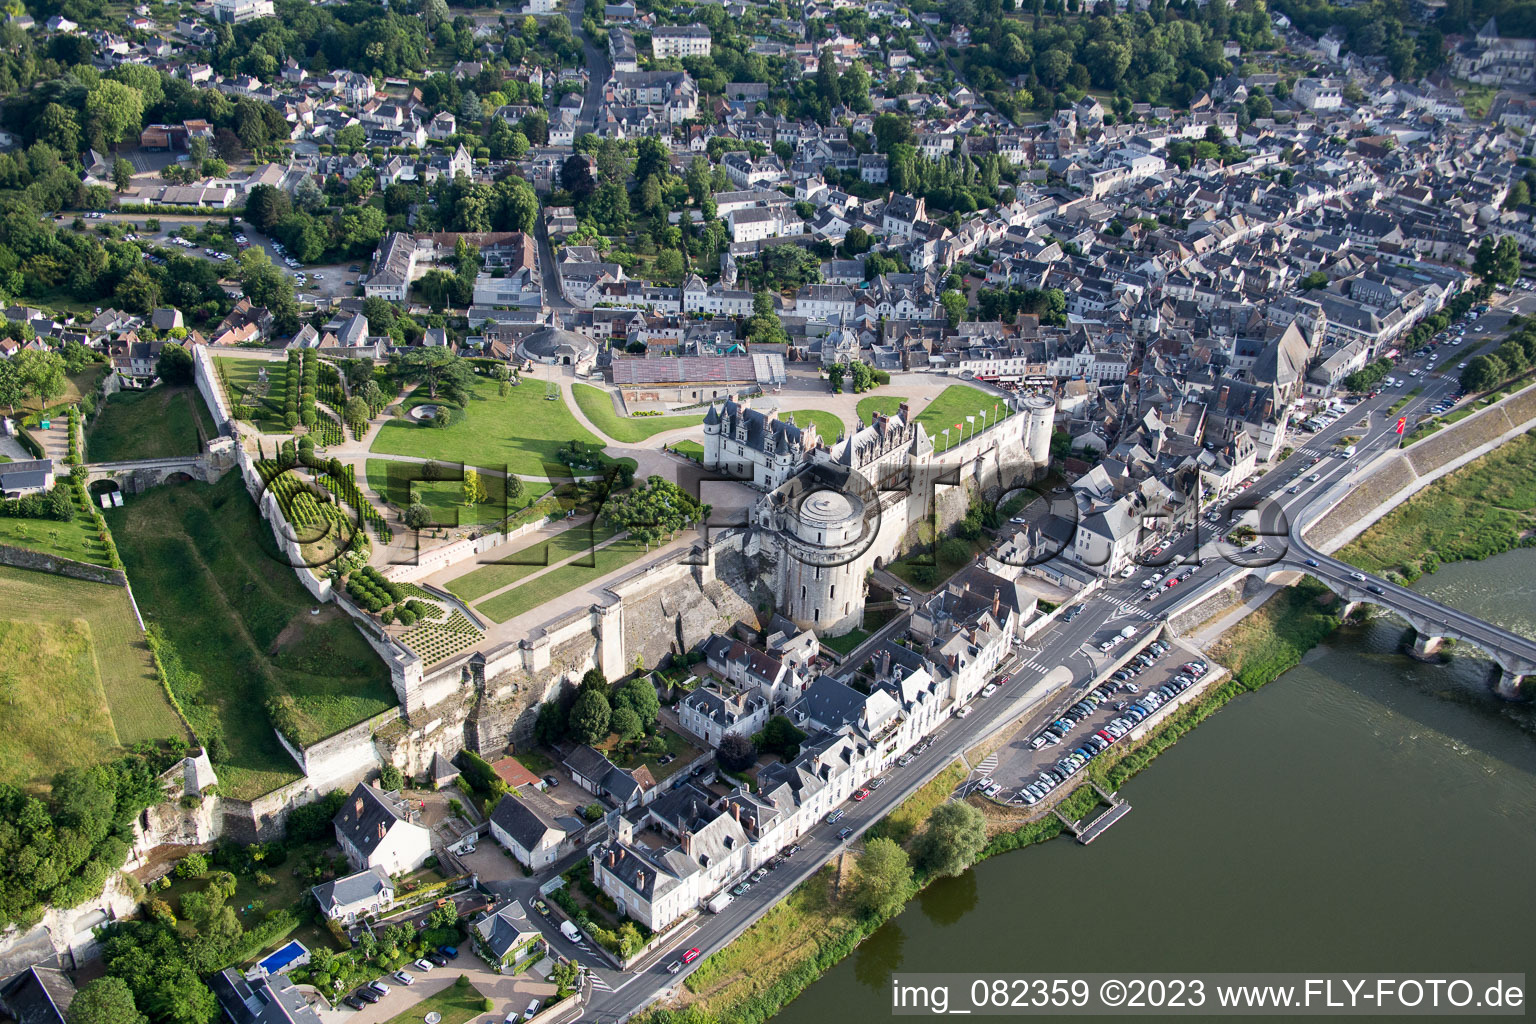 Drone recording of Amboise in the state Indre et Loire, France